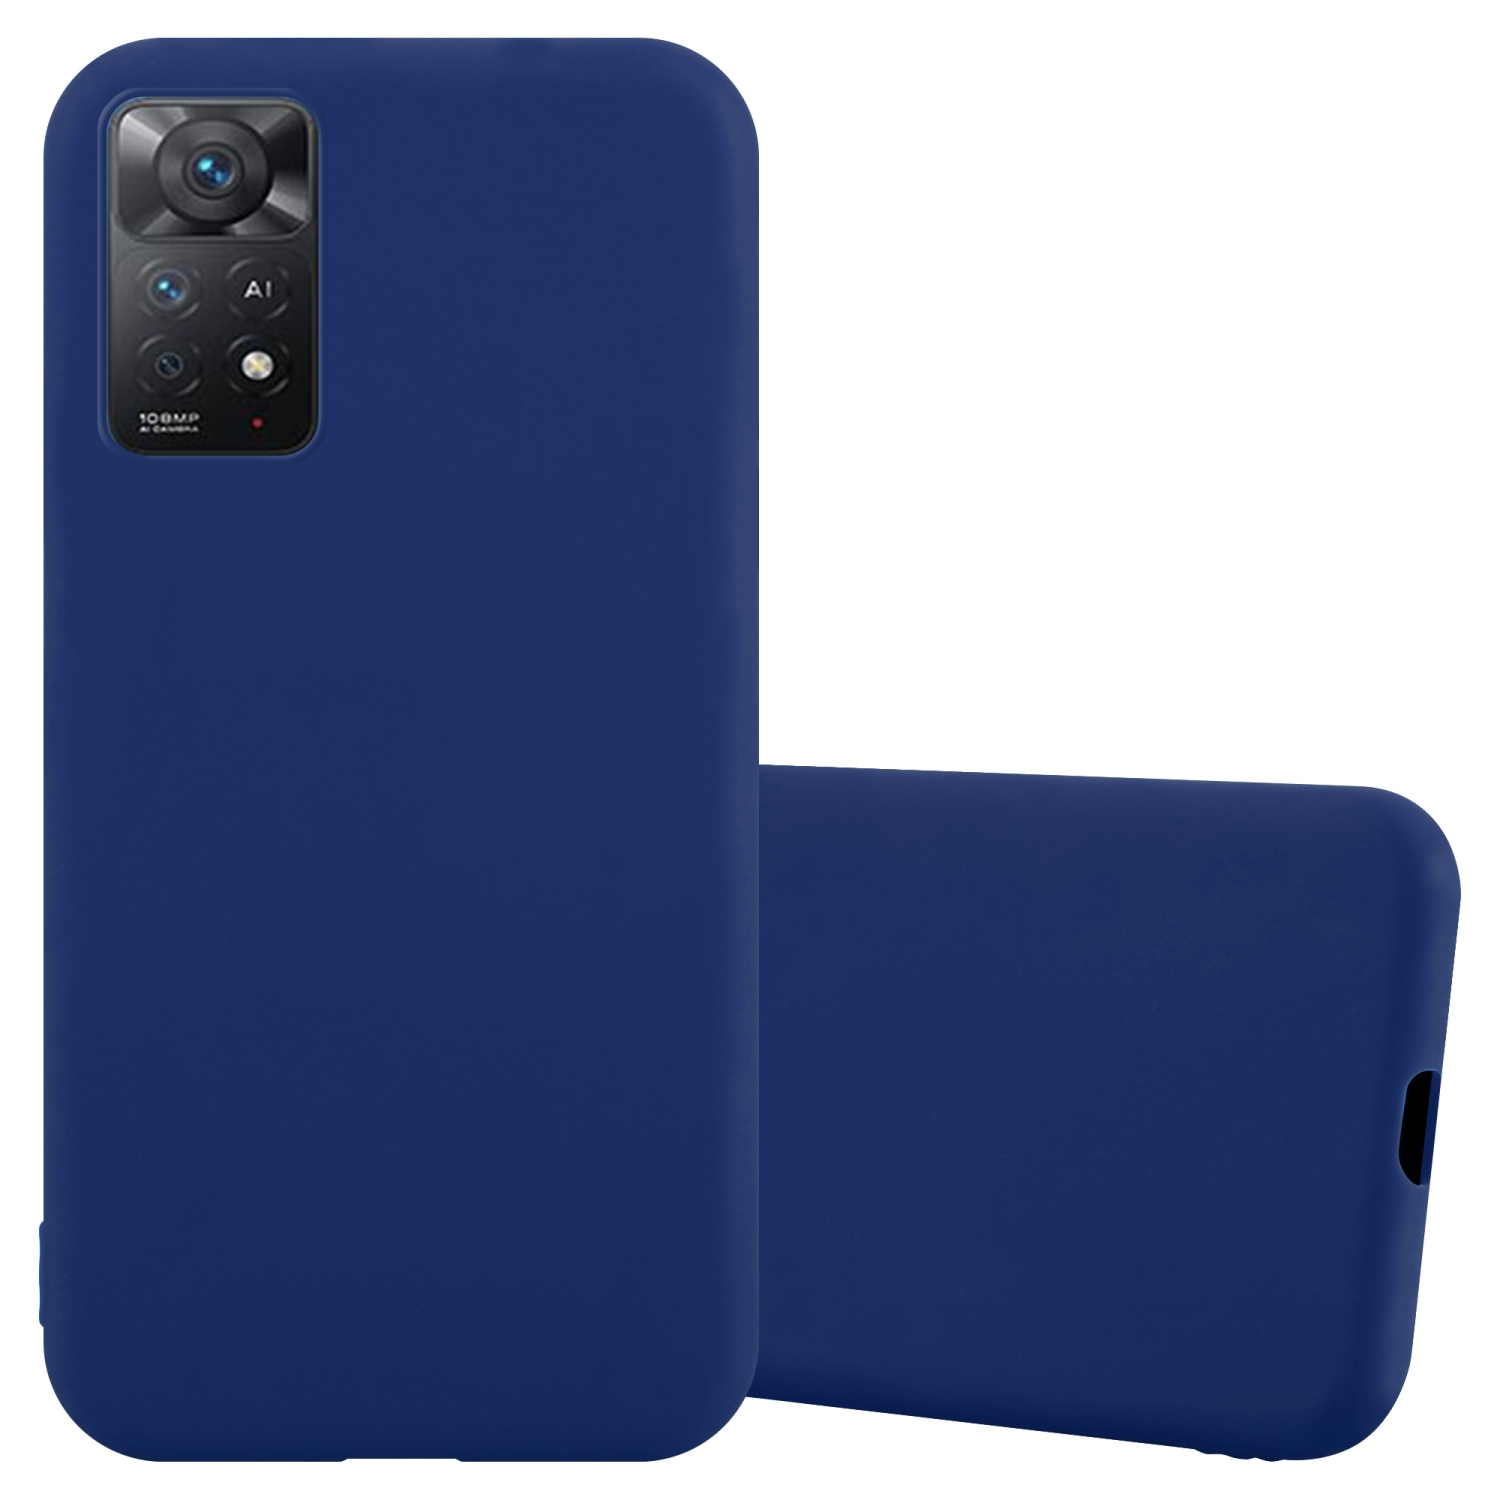 NOTE im Backcover, 11 BLAU 4G CADORABO / Candy Xiaomi, PRO 5G, Hülle CANDY TPU RedMi Style, DUNKEL